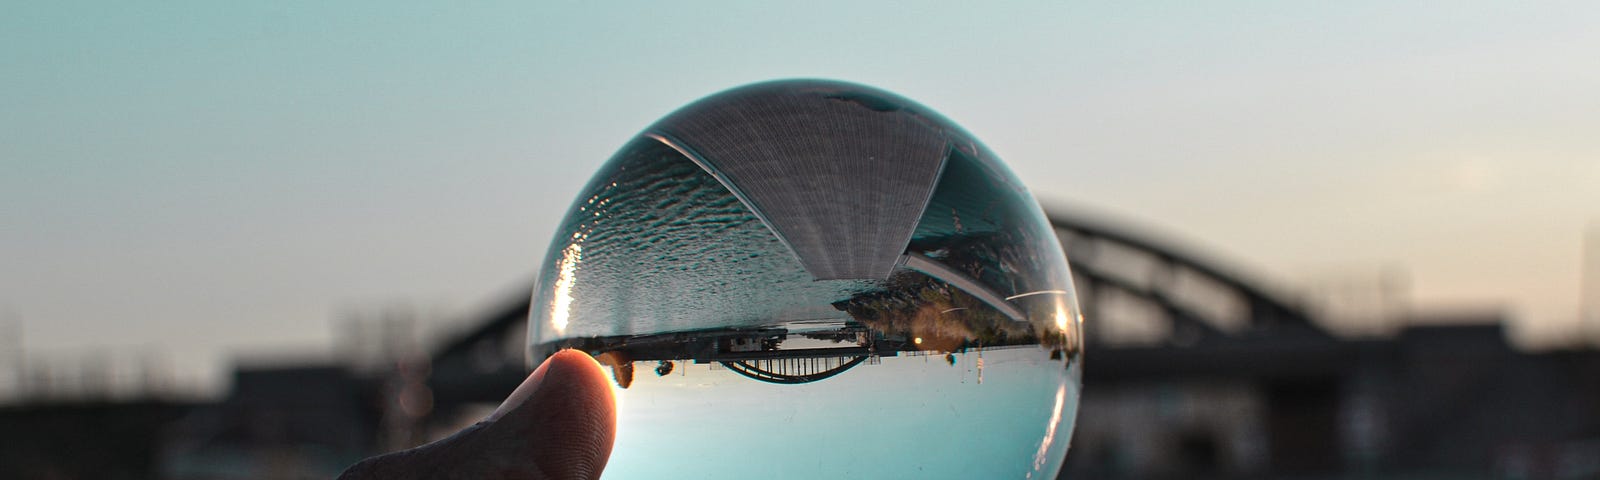 A hand holds up a glass sphere, showing an upside down perspective of a bridge over water.